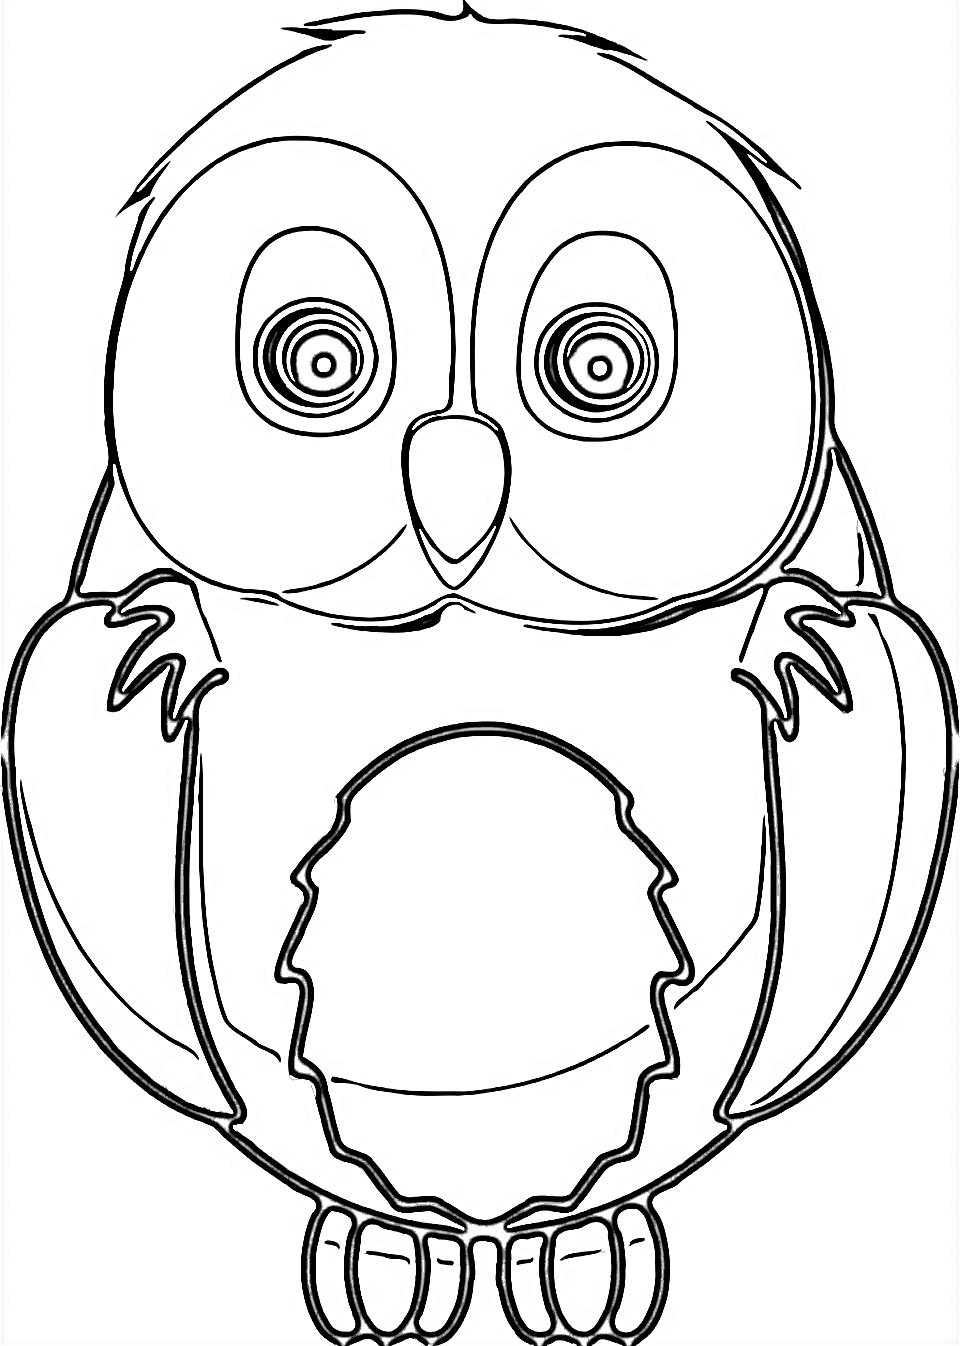 Sweet Cartoon Owl Coloring Page